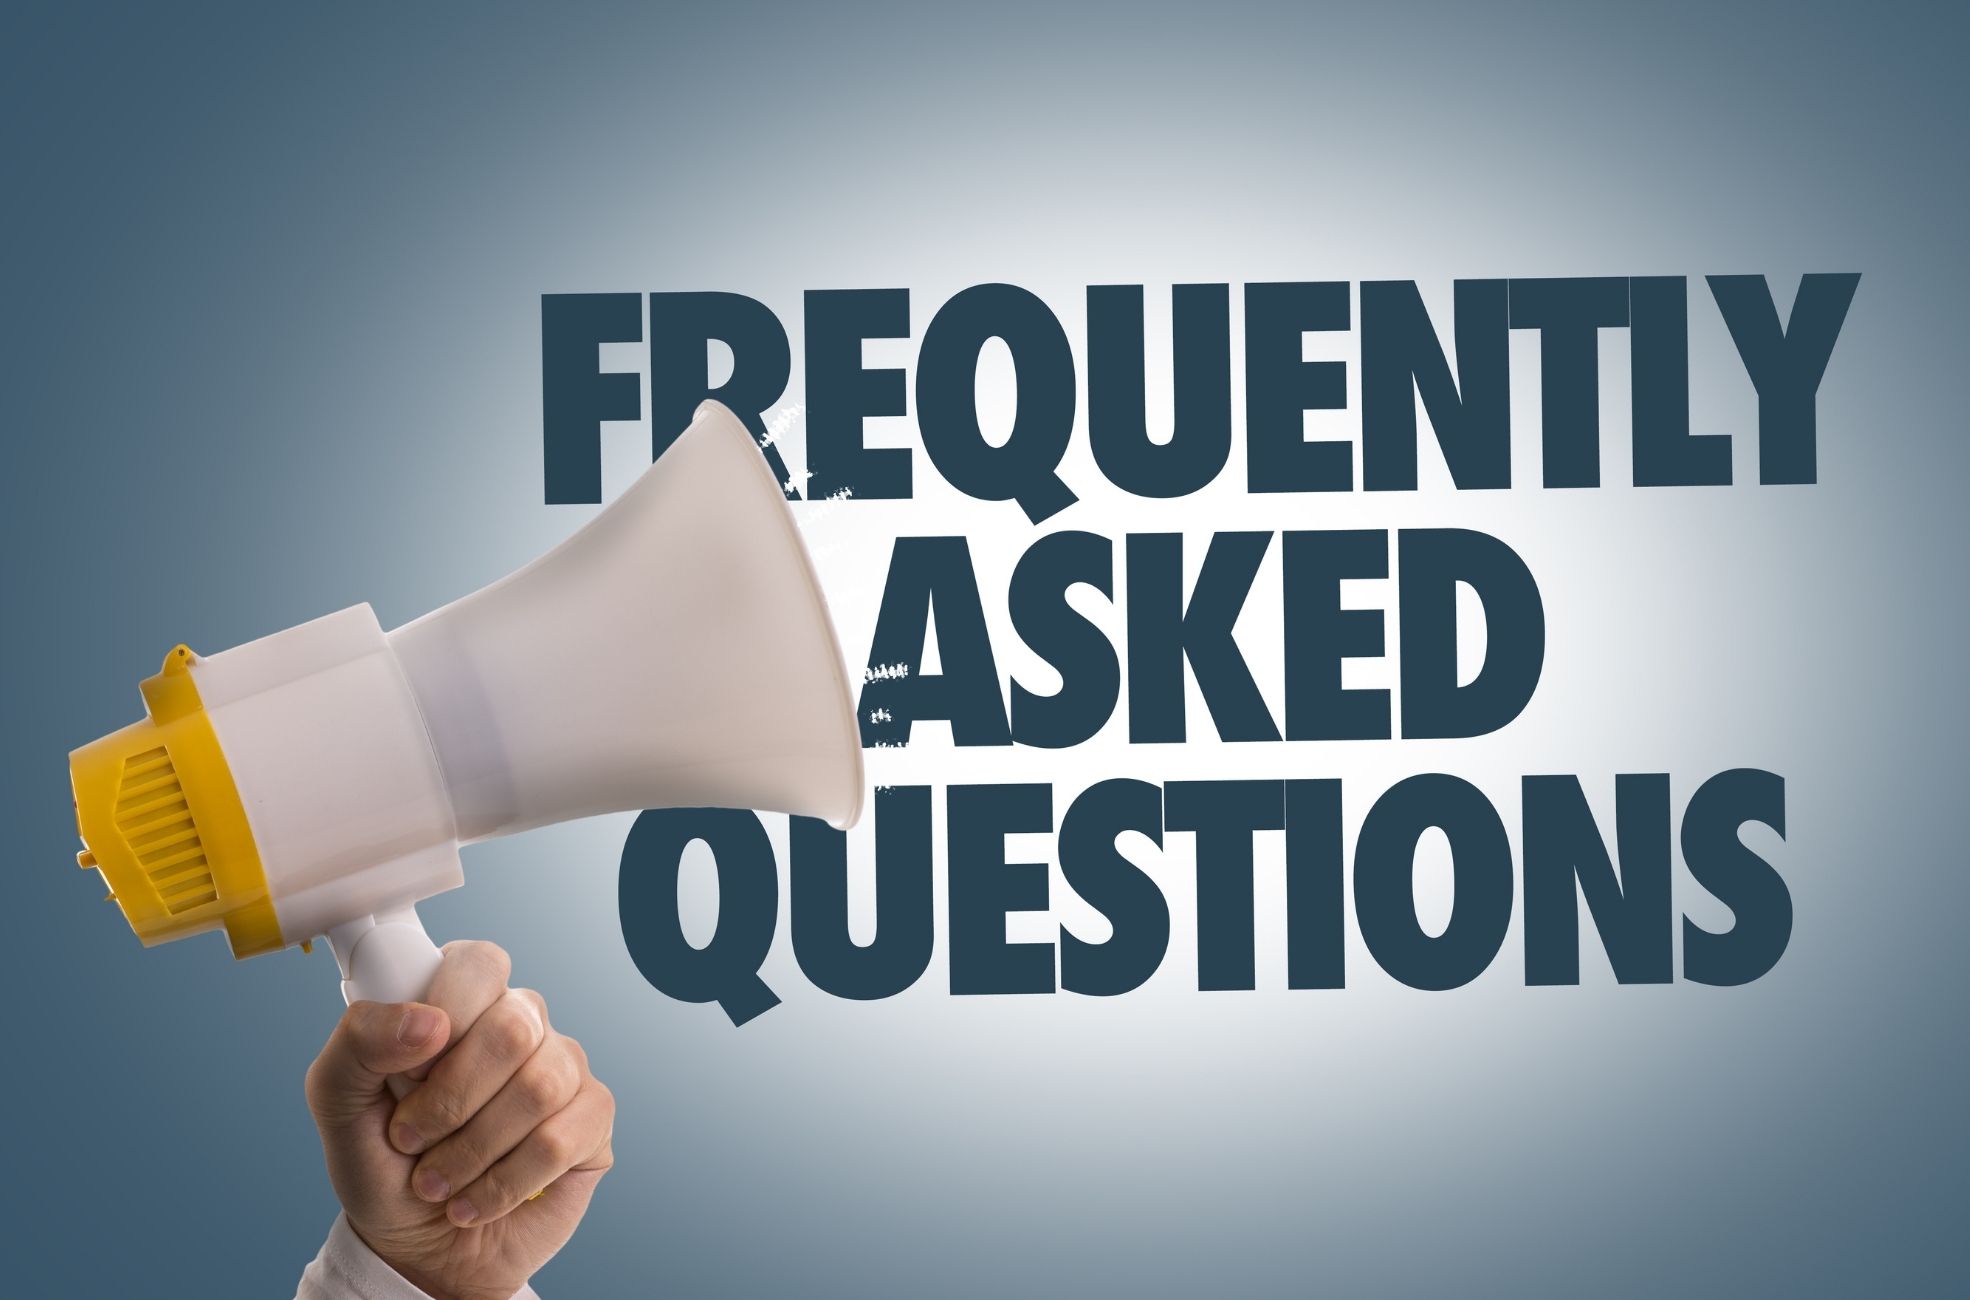 Frequently Asked Questions Written Next To Megaphone